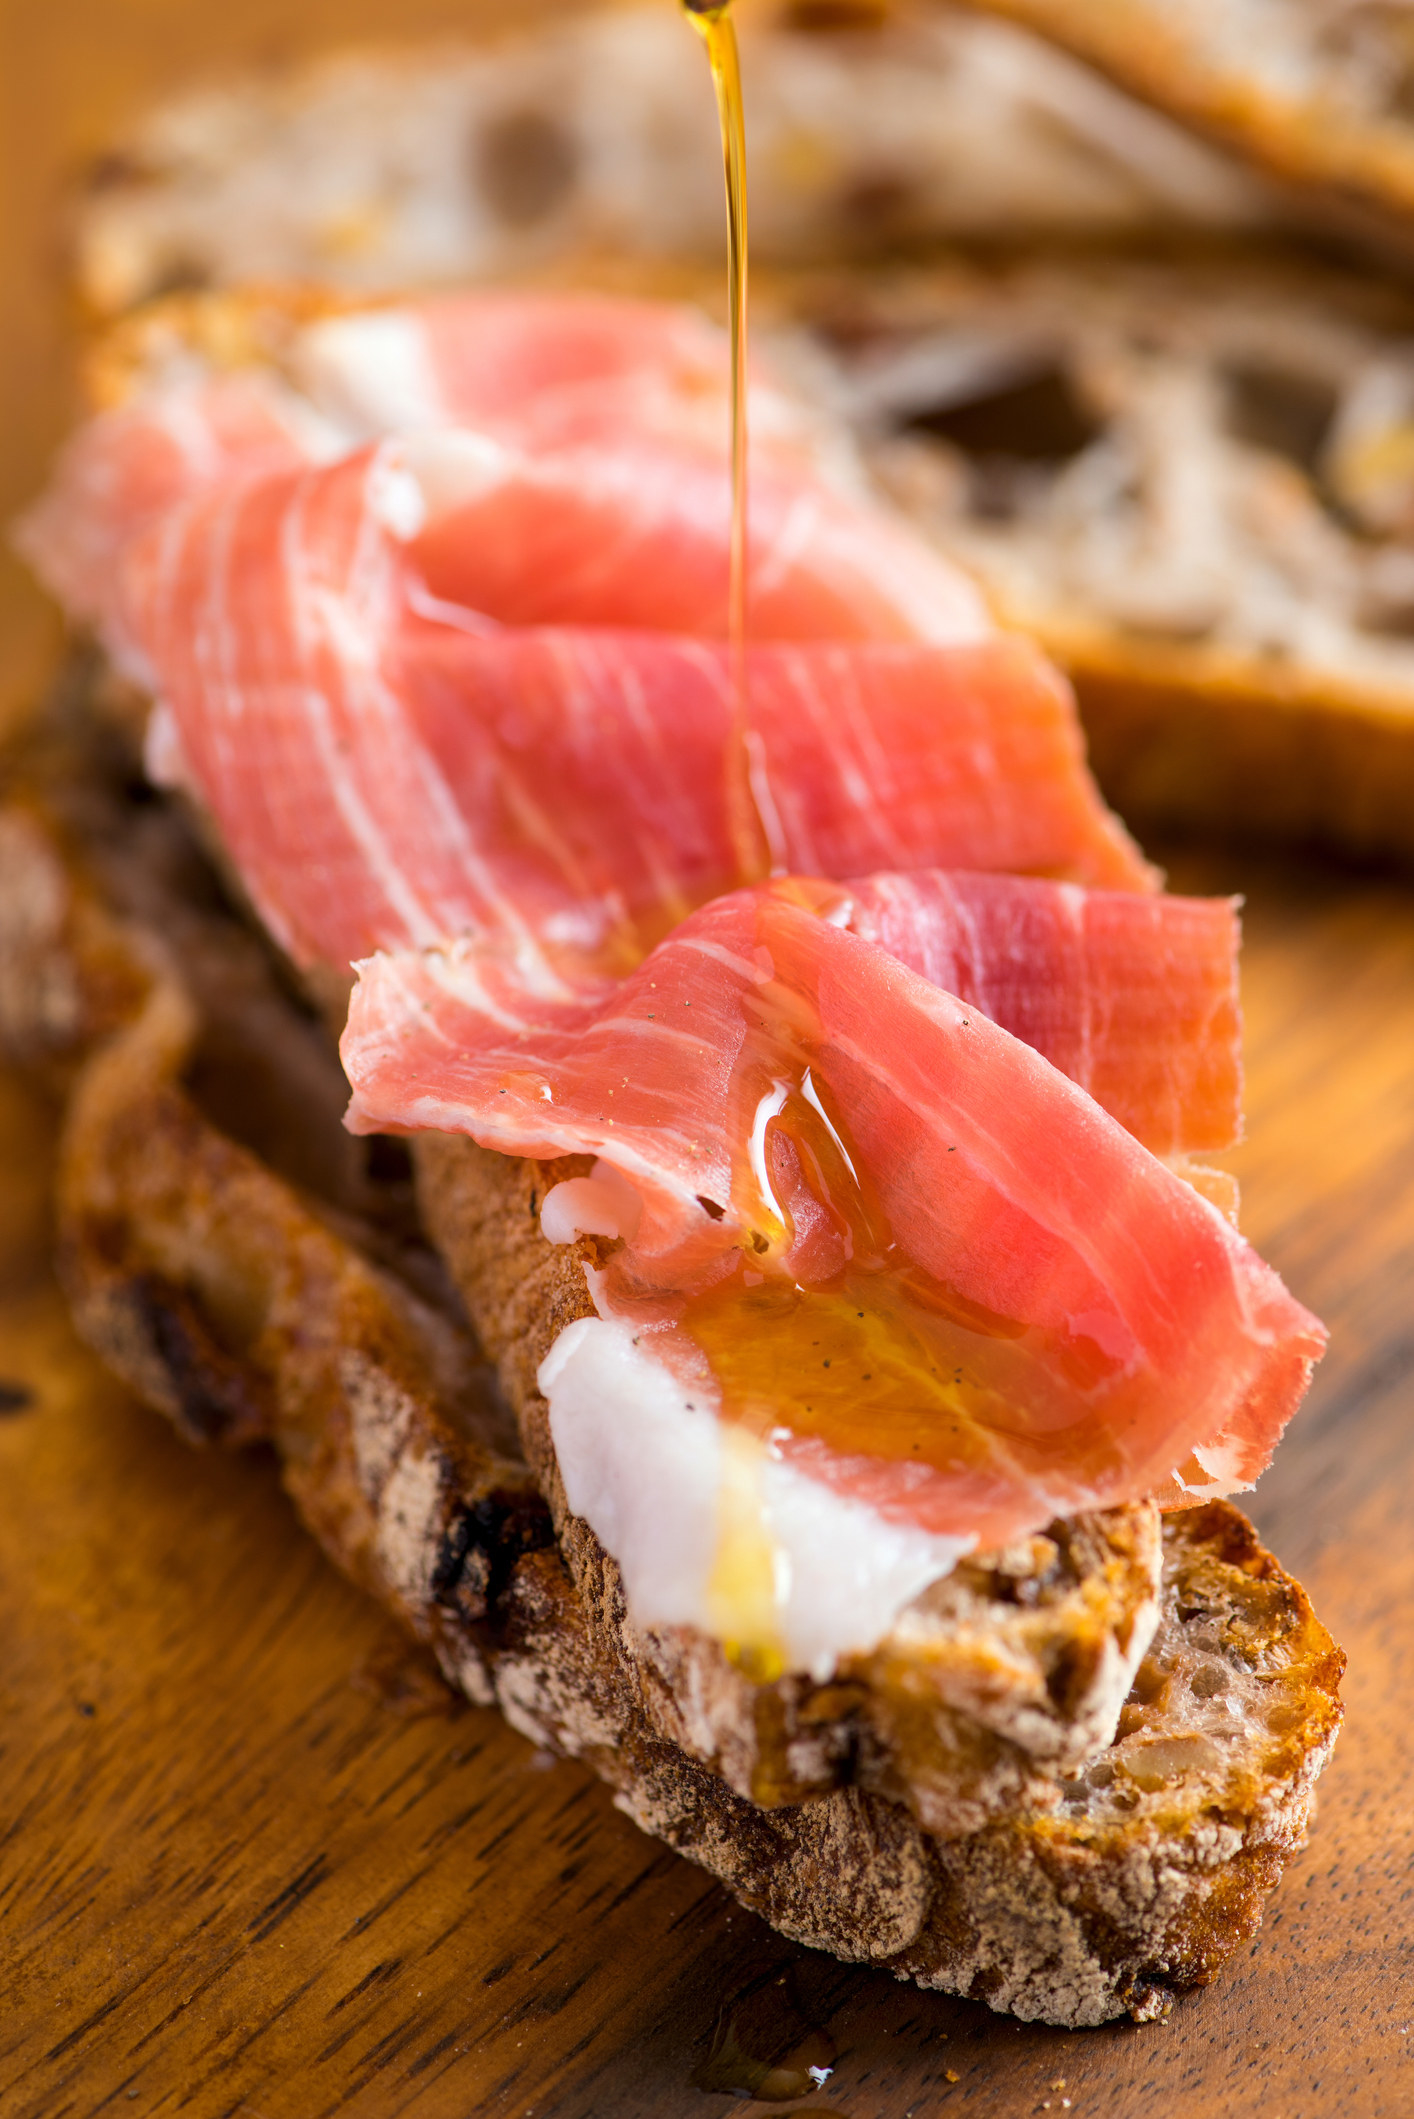 Sourdough rye bread with sliced prosciutto, drizzled with olive oil